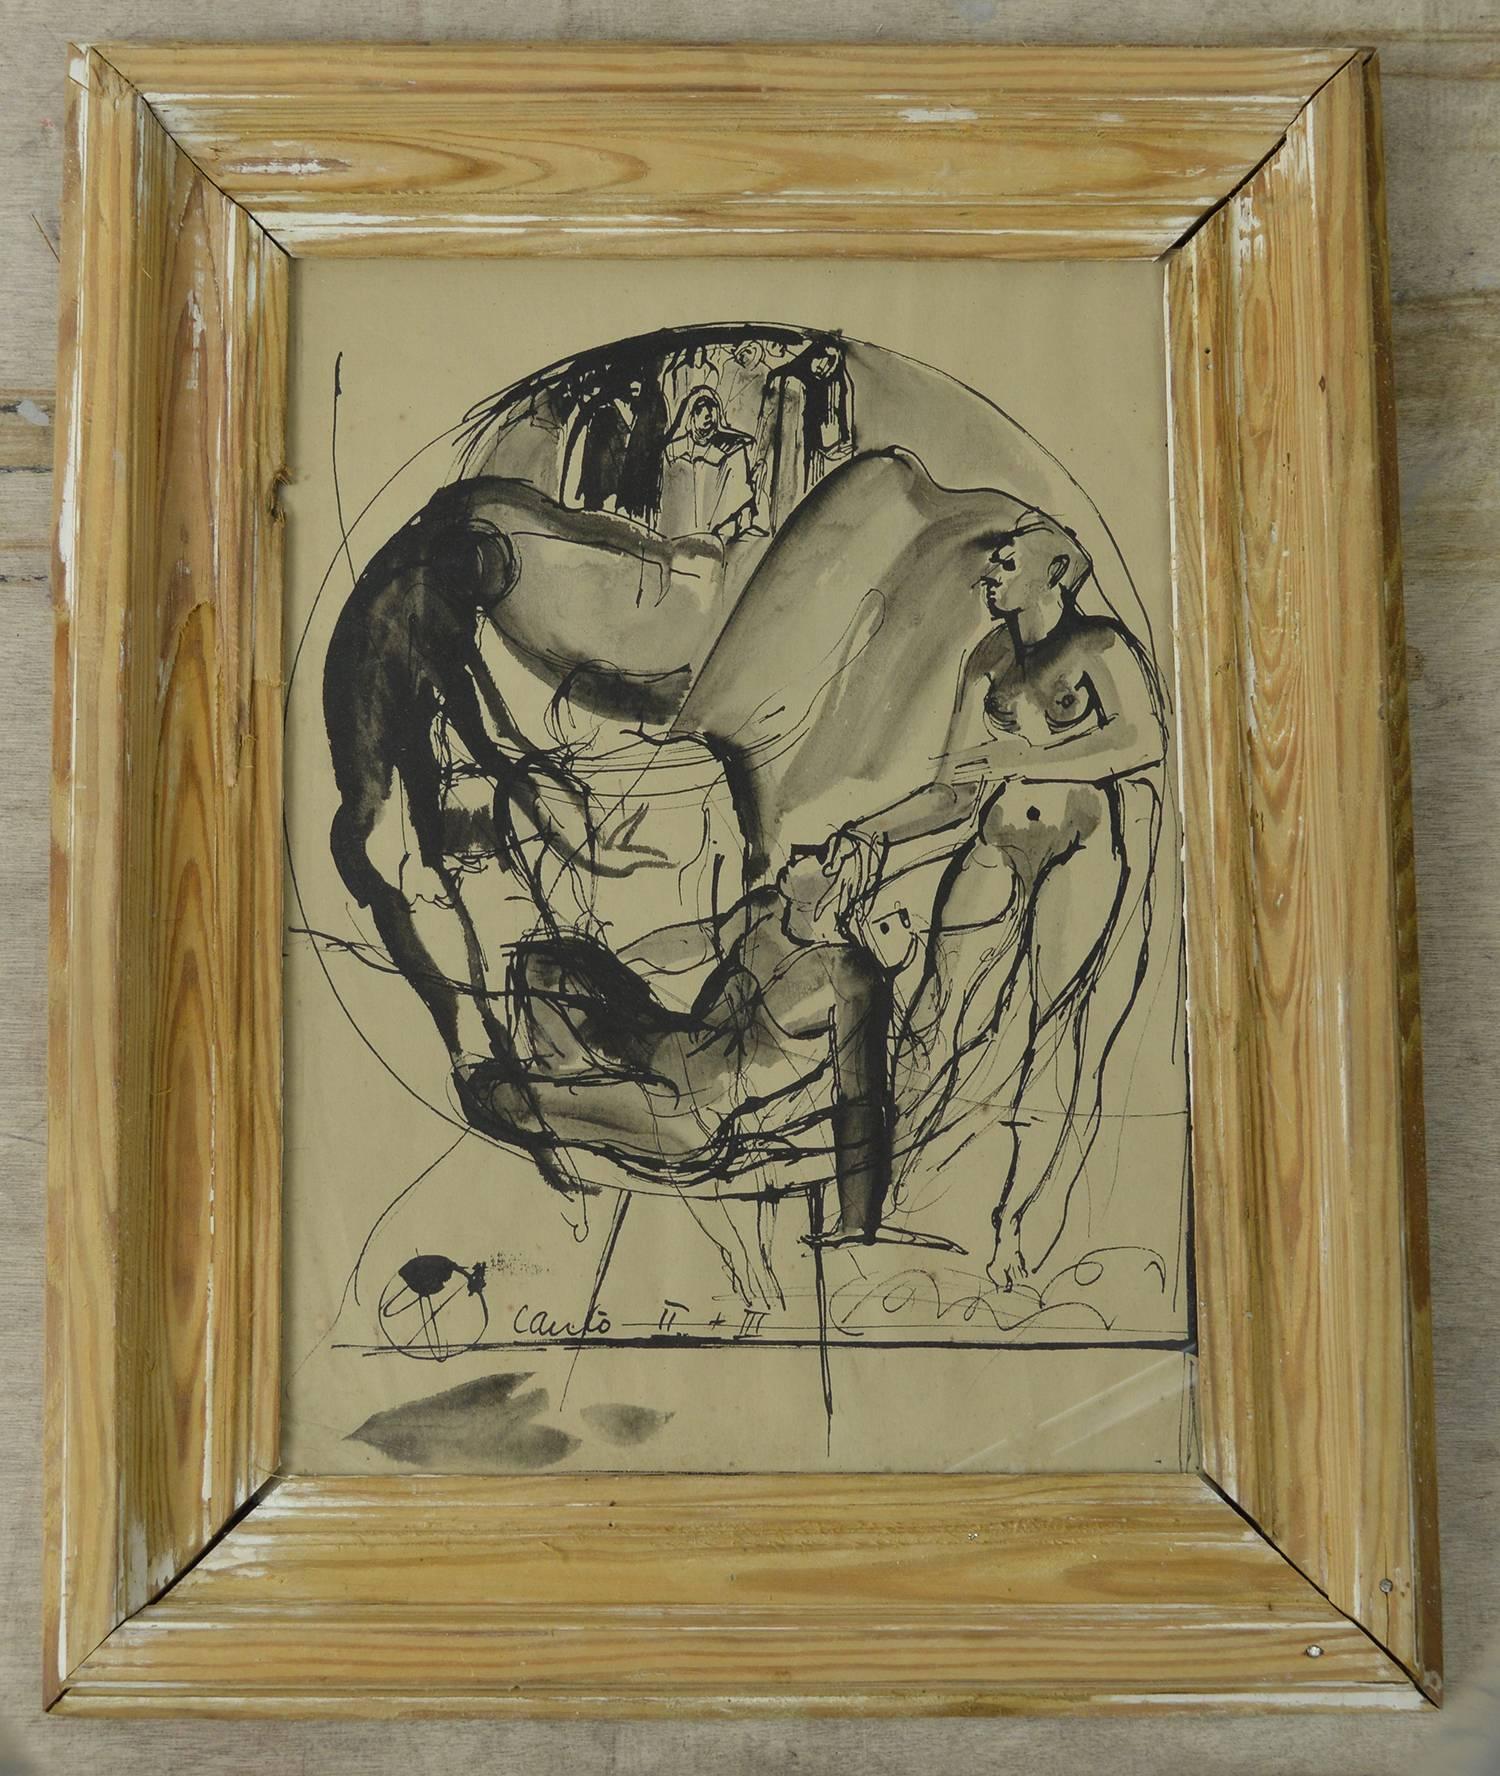 Amazing ink and wash by Peter William Ibbetson. Titled Canto II + III. I believe this relates to one of Dante's works.

Unsigned. On paper.

Presented in a distressed antique pine frame.

P.W. Ibbetson 1908-1975 well documented is best known